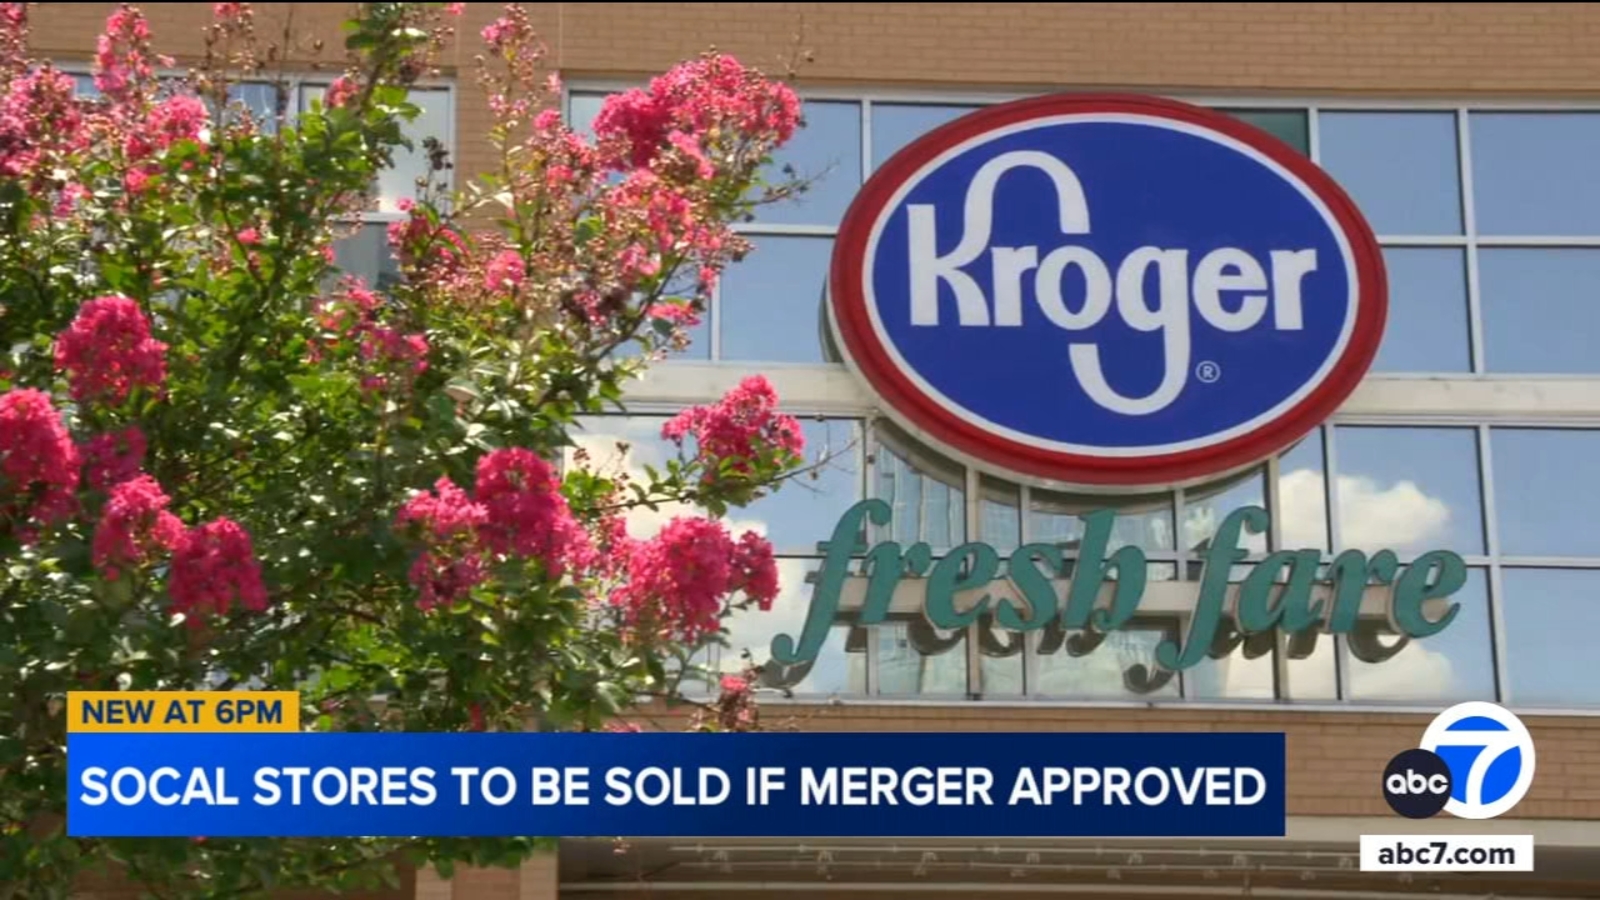 Here are the Kroger and Albertsons stores in SoCal that could be sold if they merge